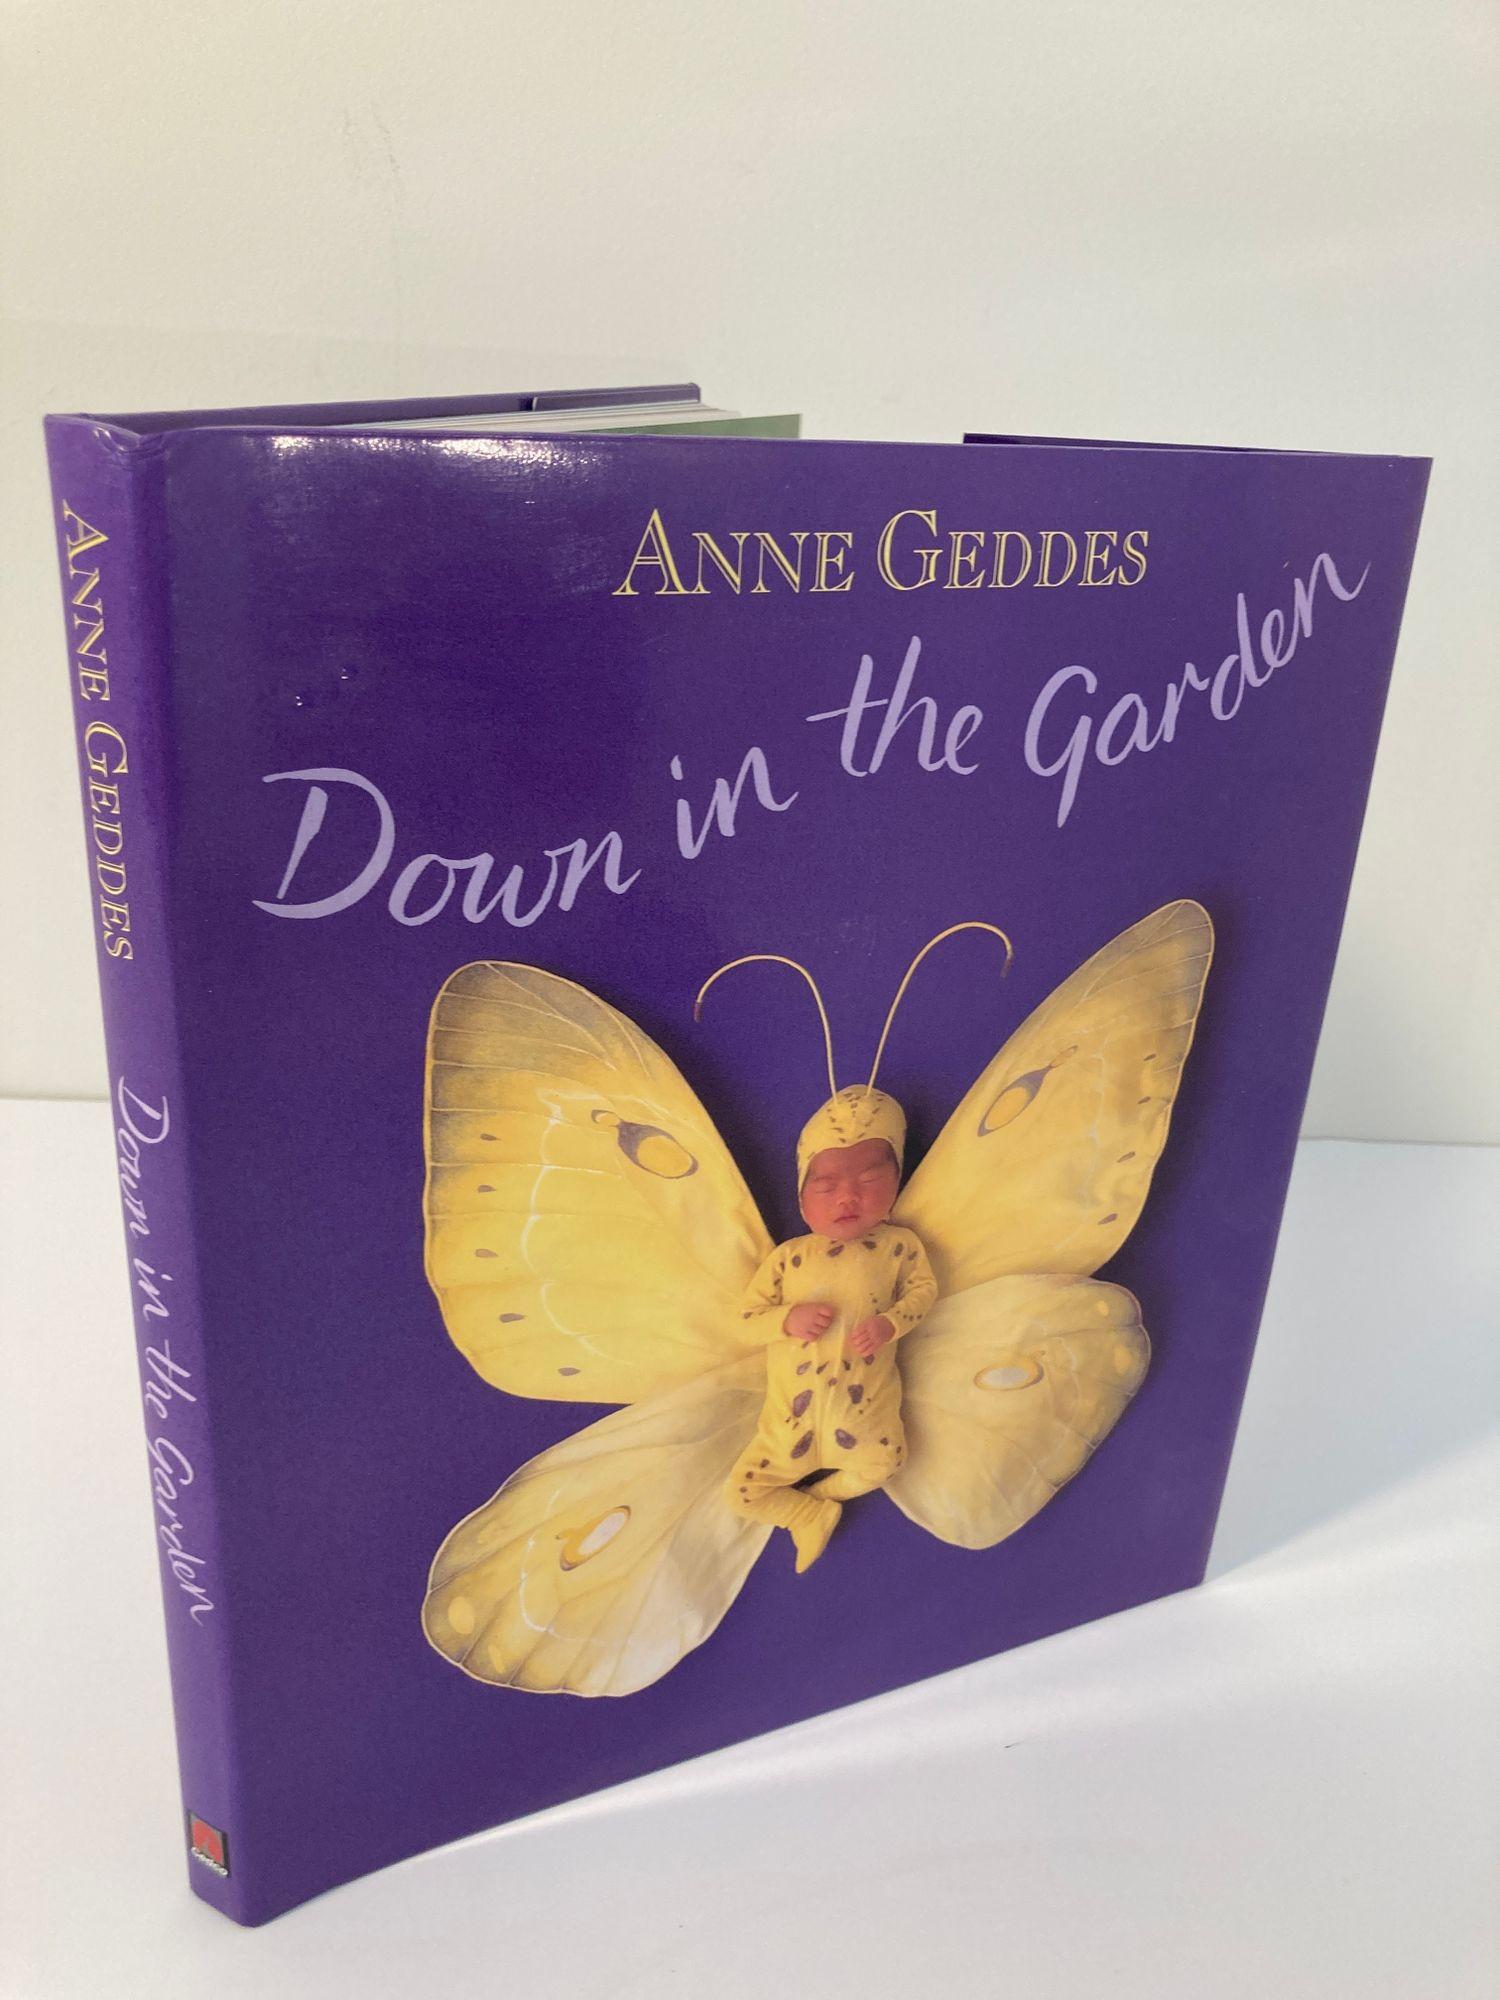 Paper Anne Geddes Down in The Garden Large Hardcover Book, 1996 For Sale